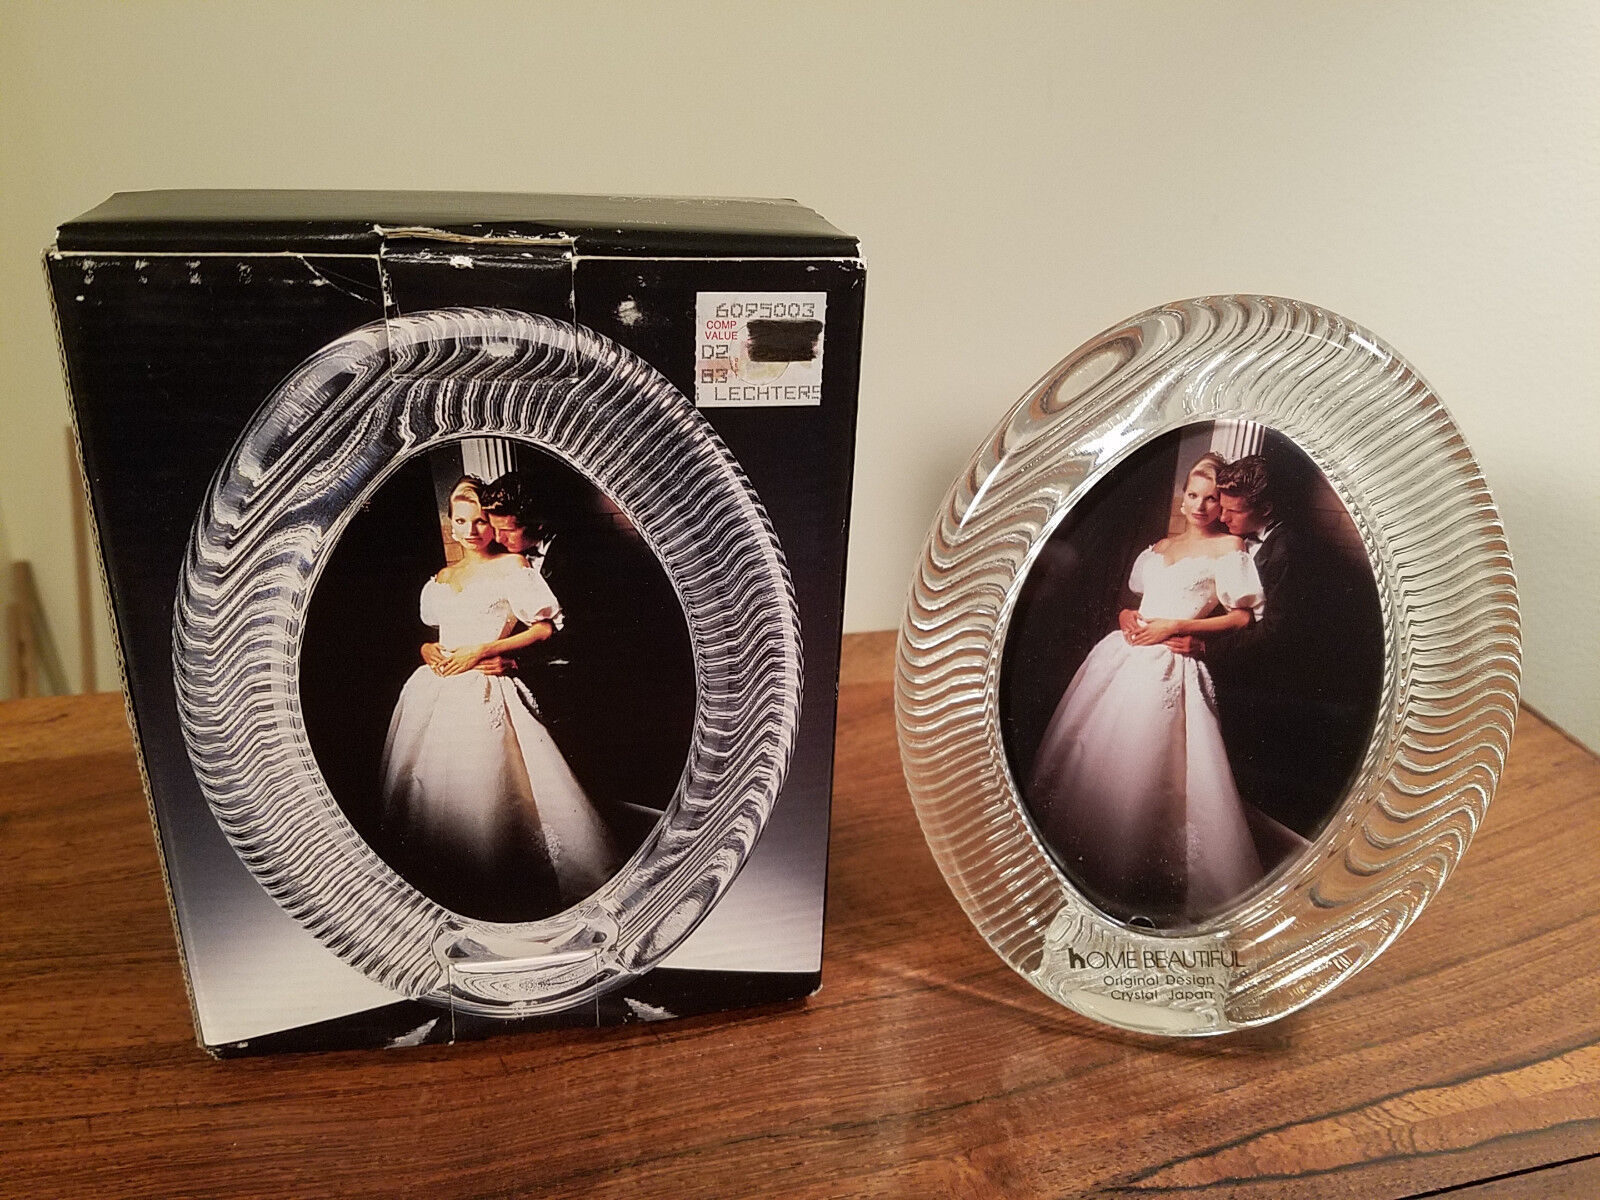 Home Beautiful Crystal Florence #QQ210577 Oval 6 1/4" x 5" Picture Frame (NEW) - $9.85